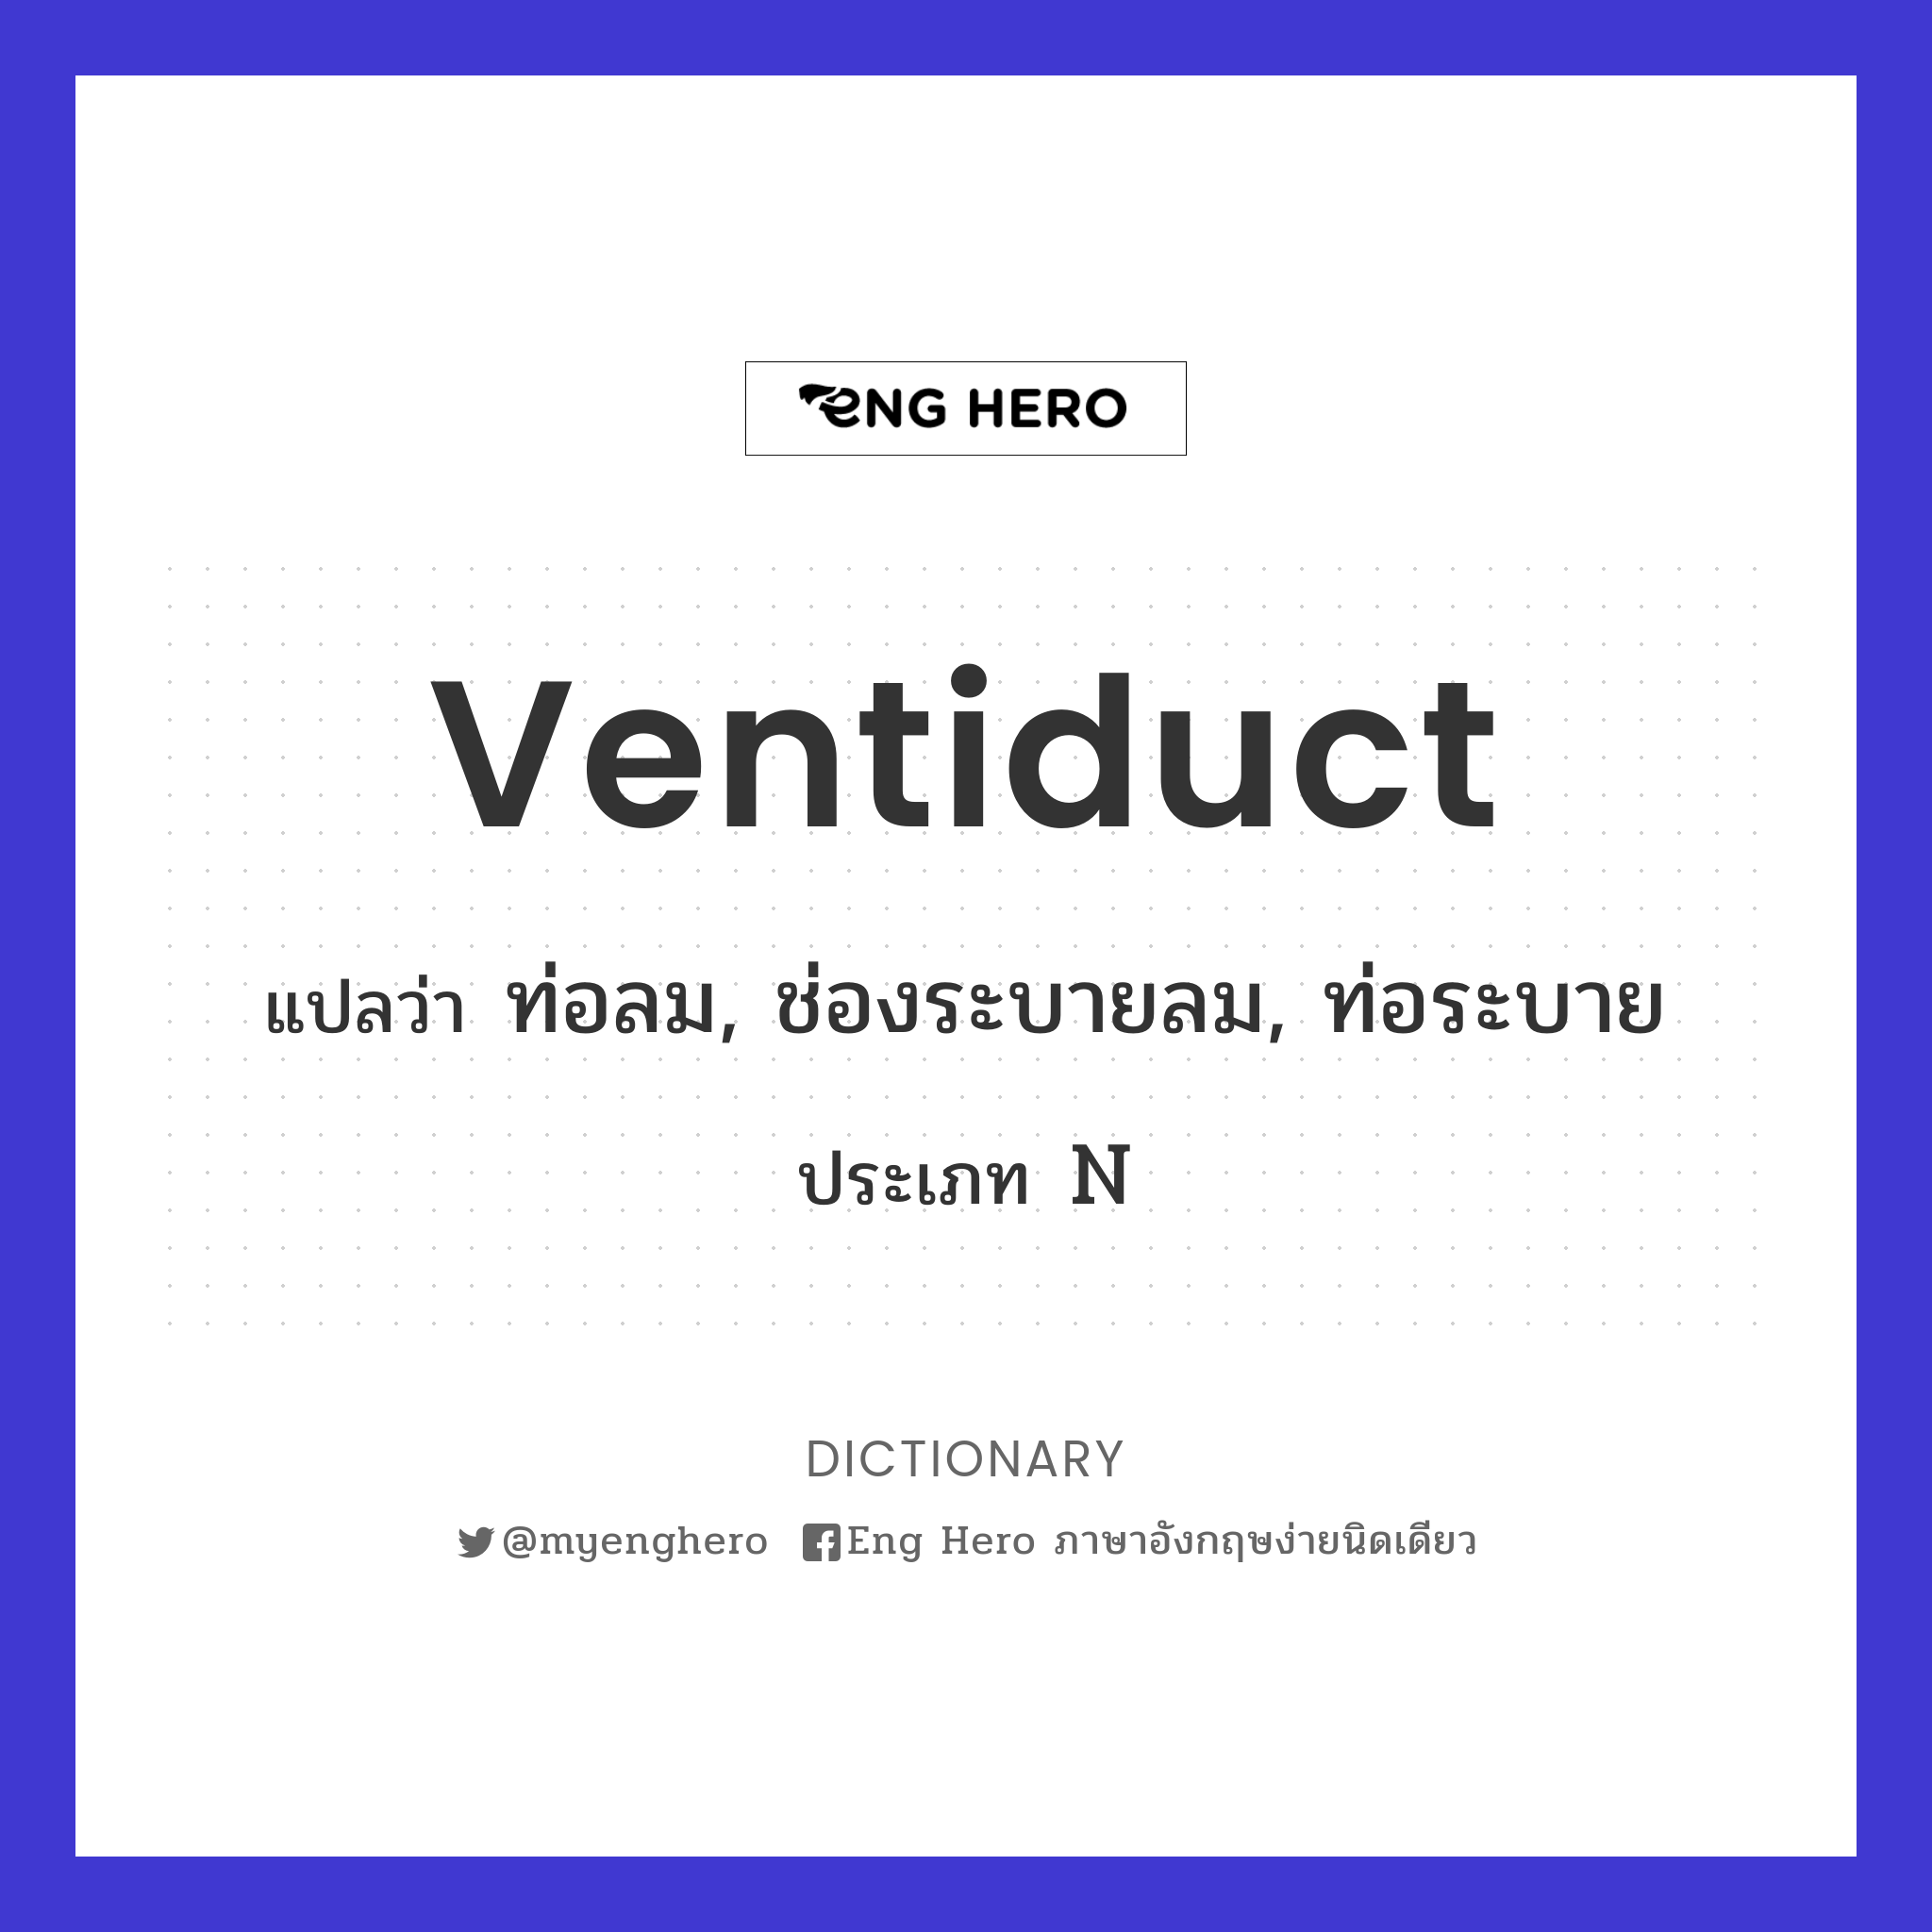 ventiduct